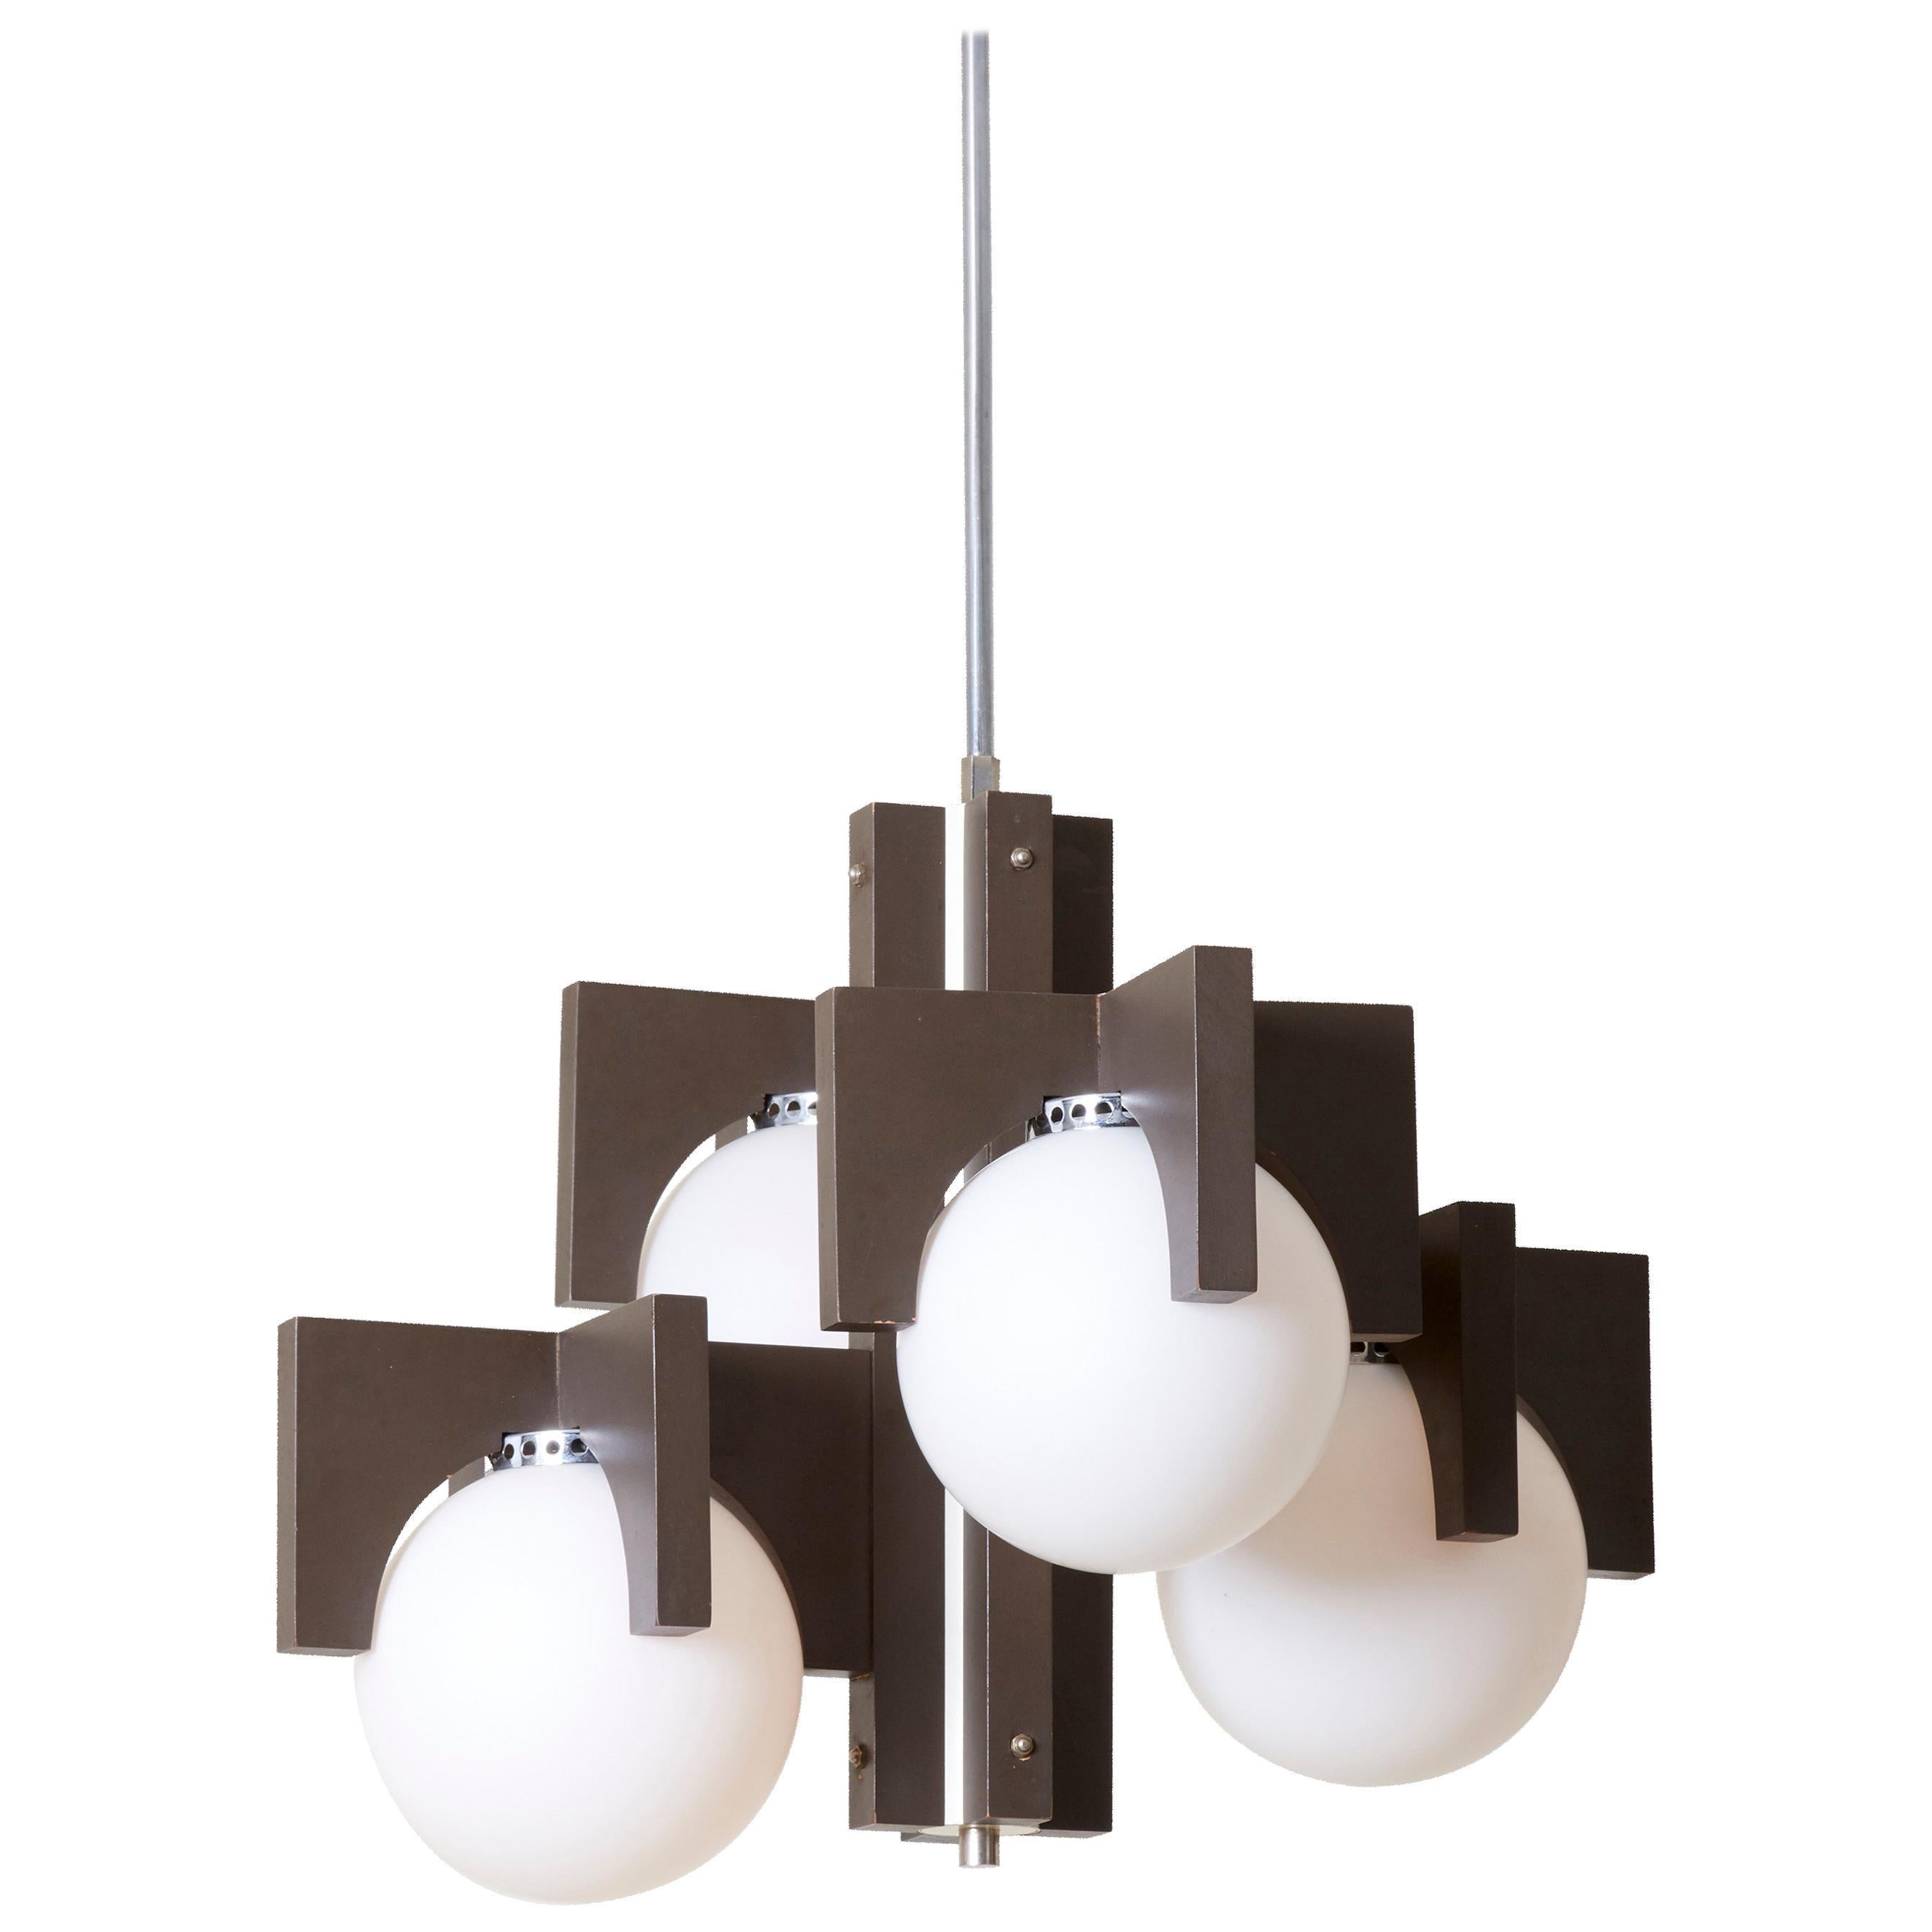 Architectural Pendant Lamp or Chandelier